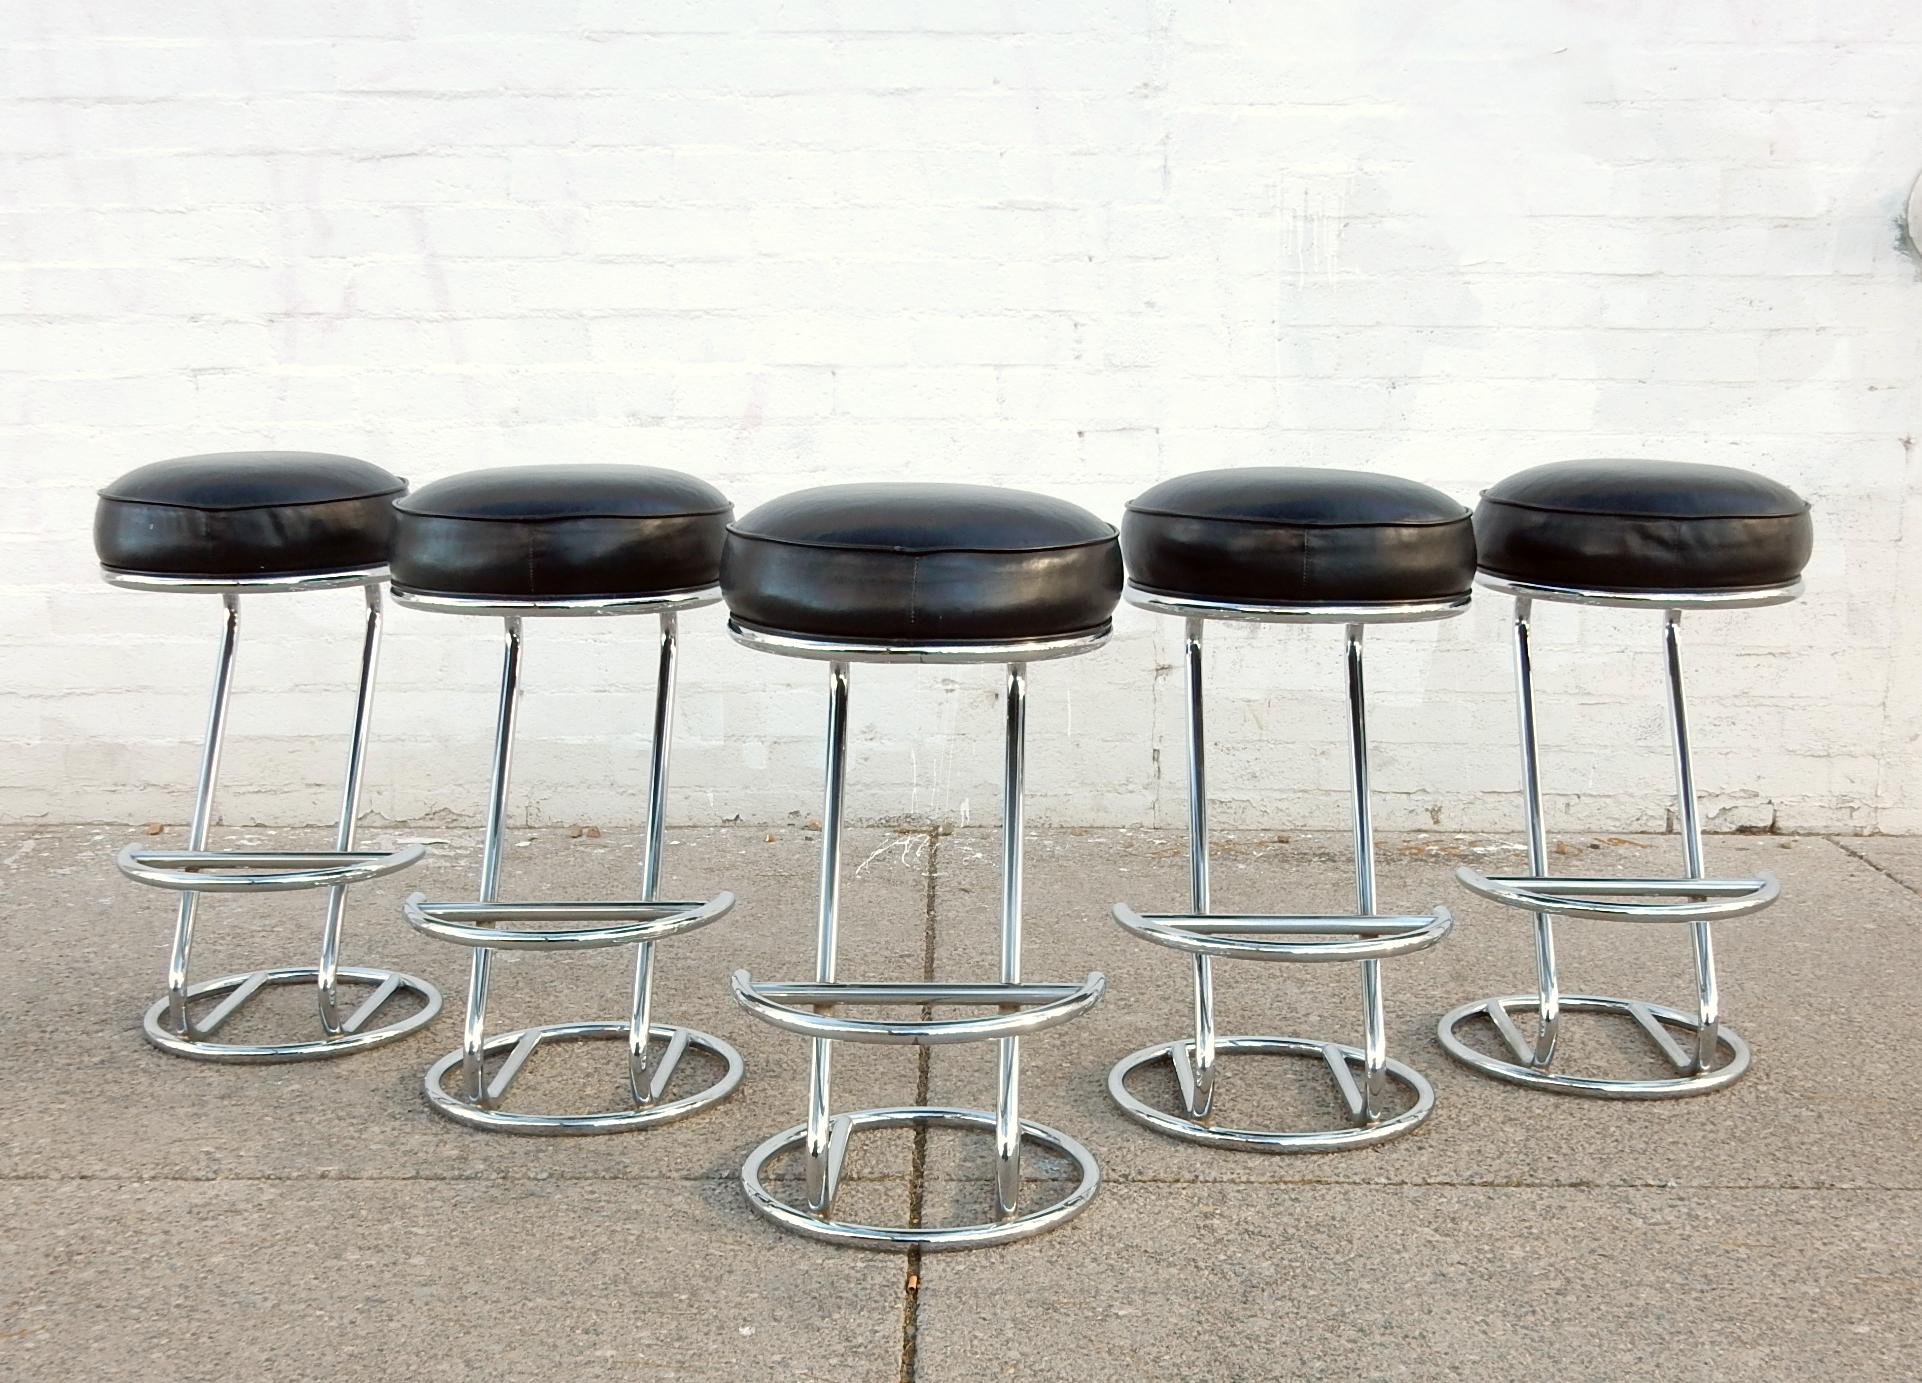 Set of 5 tall bar stools from the 1960s.
Sculpted of steel tubing with triple chrome plating.
Muffin top seating area consisting of premium black leather
filled with the finest plush memory foam.
Heavy solid and very comfortable.
32 inch to top